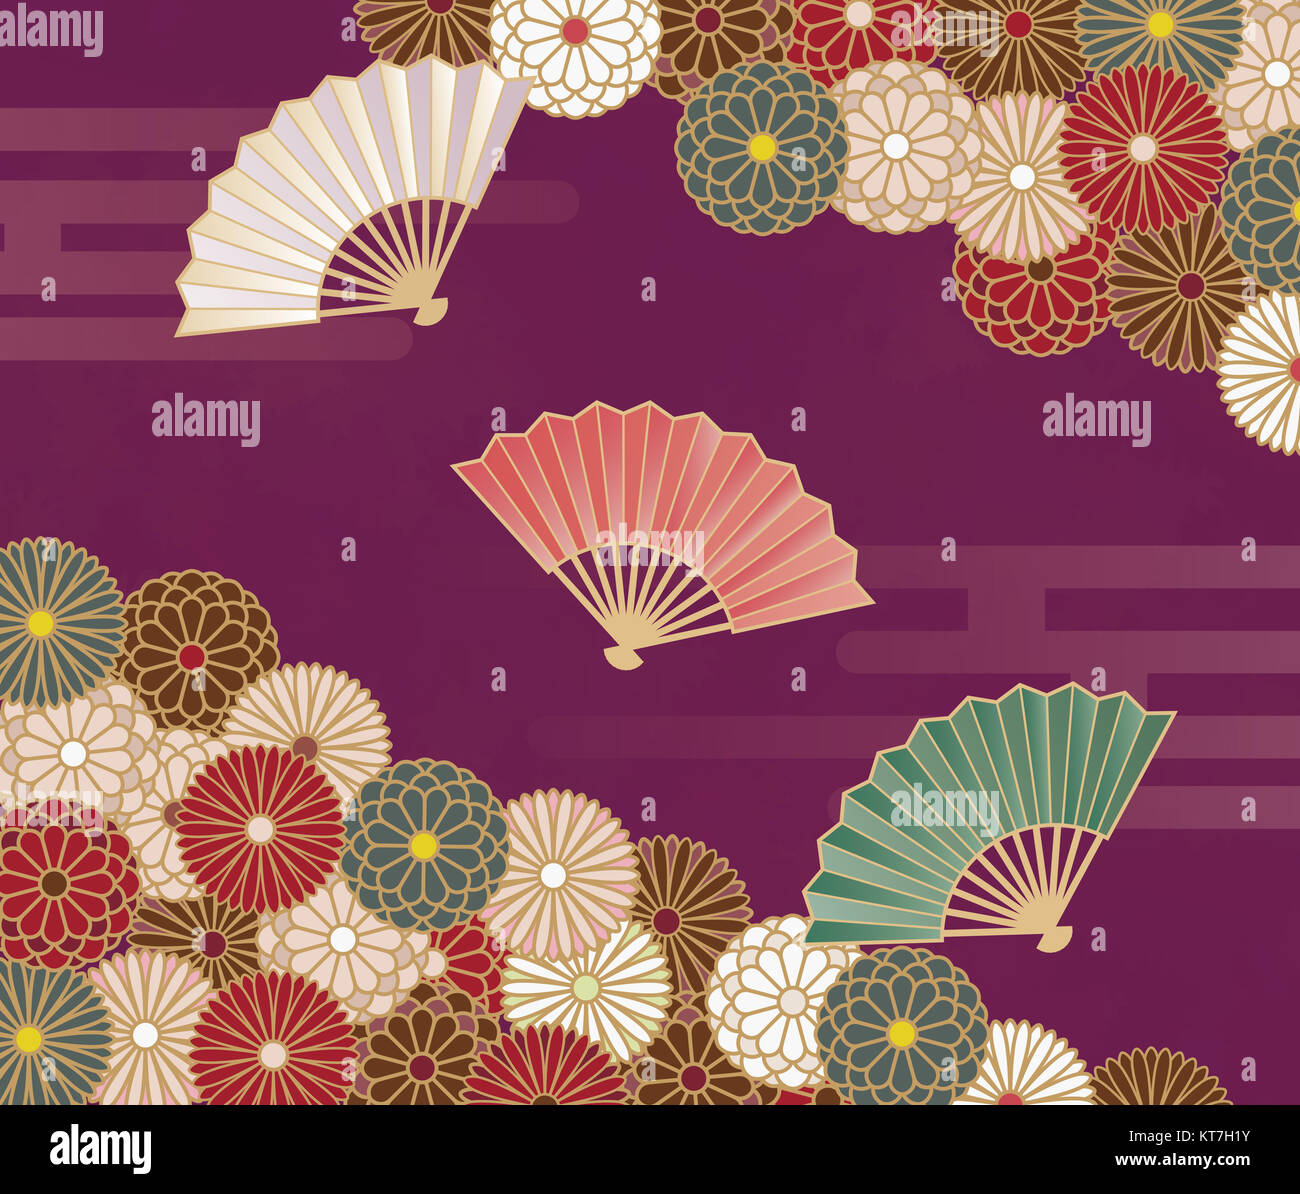 Japanese style floral pattern with chrysanthemums and hand fan Stock Photo